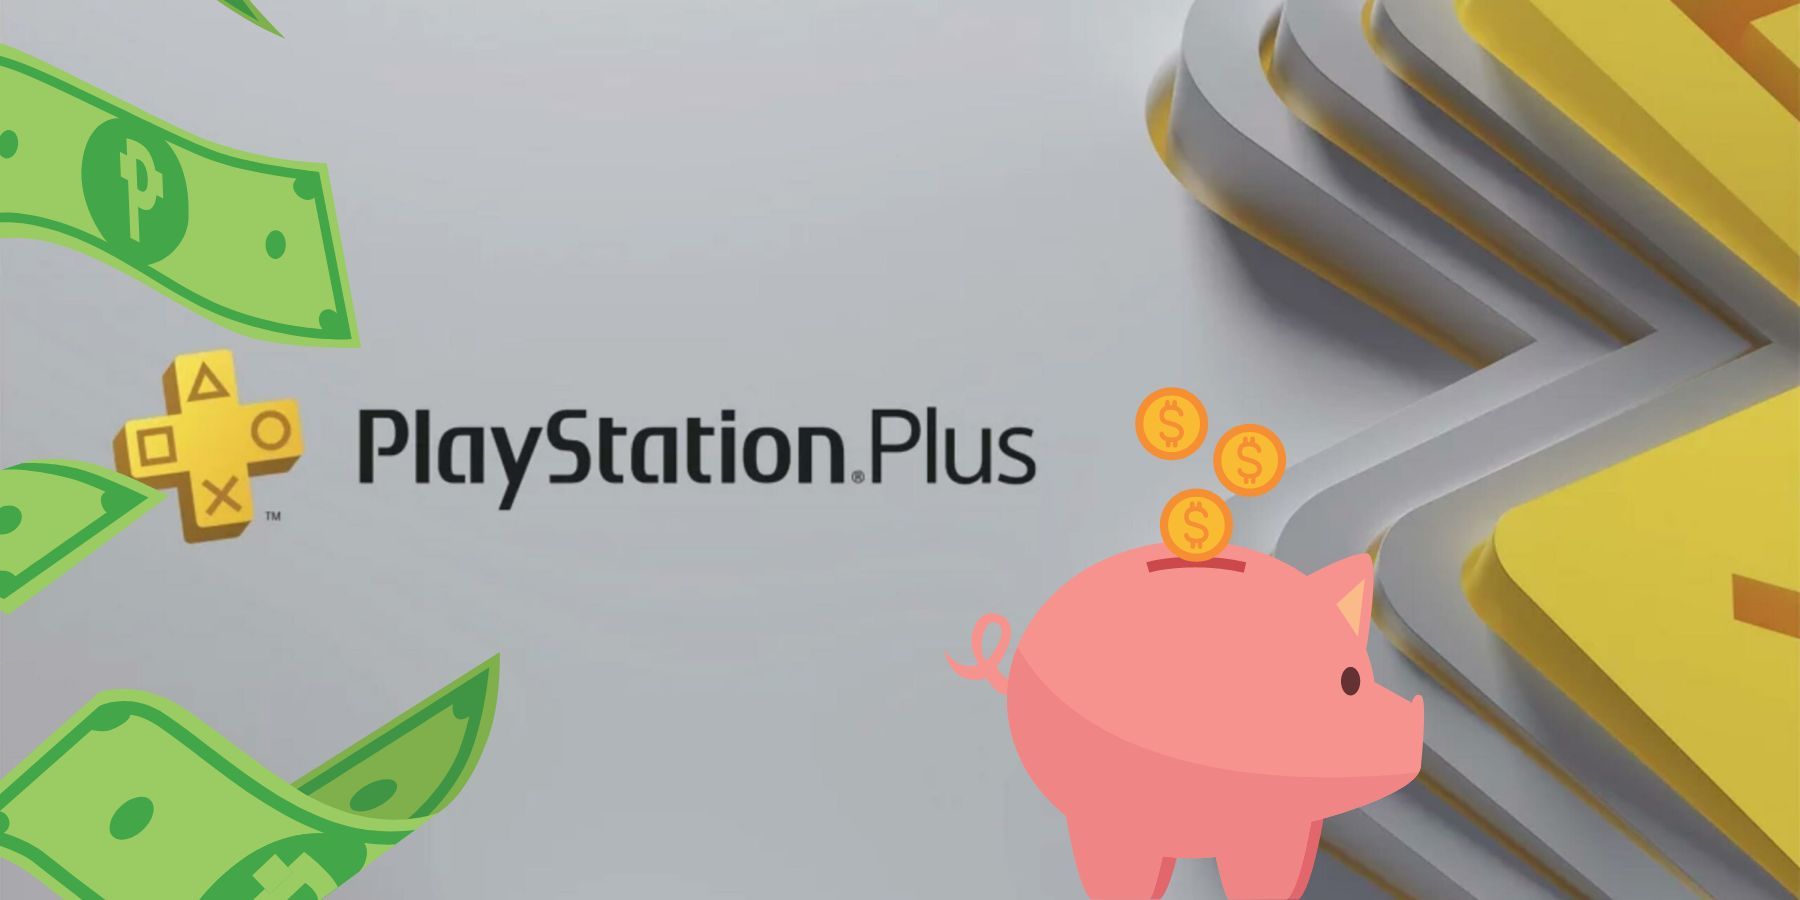 LAST CHANCE to Get PS Plus Before the New MASSIVE PRICE INCREASE